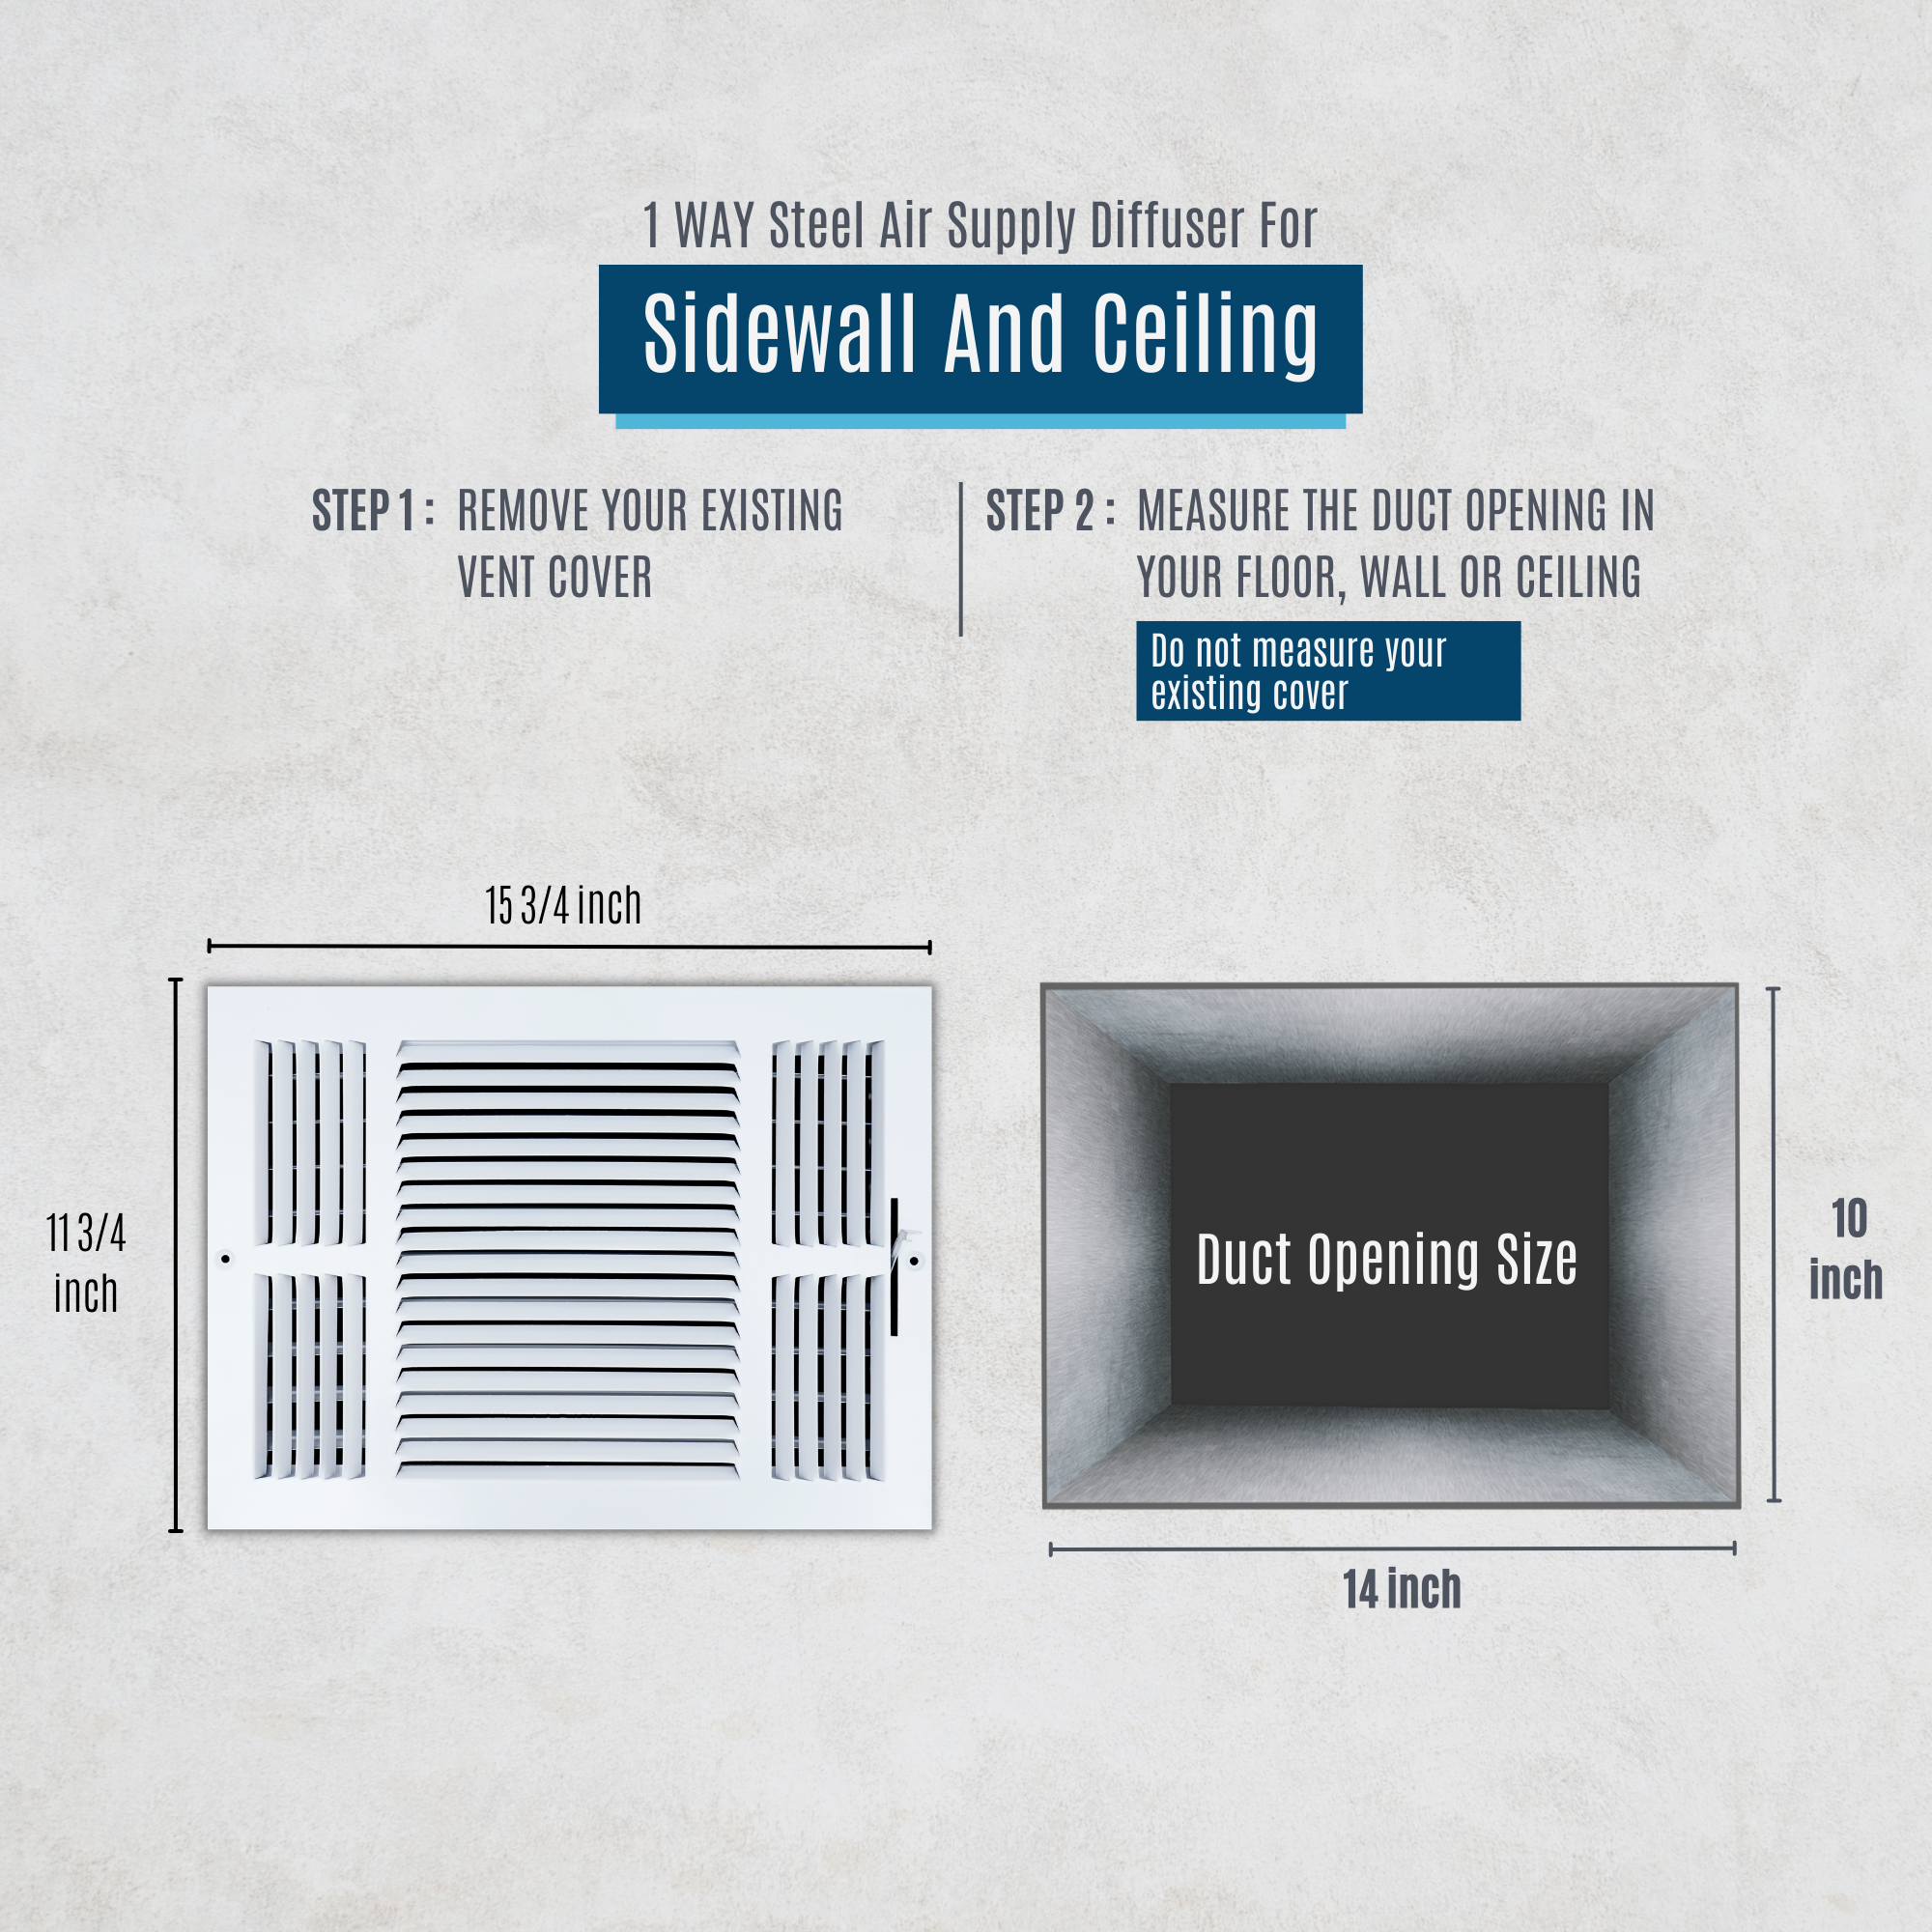 14 X 10 Duct Opening | 3 WAY Steel Air Supply Diffuser for Sidewall and Ceiling